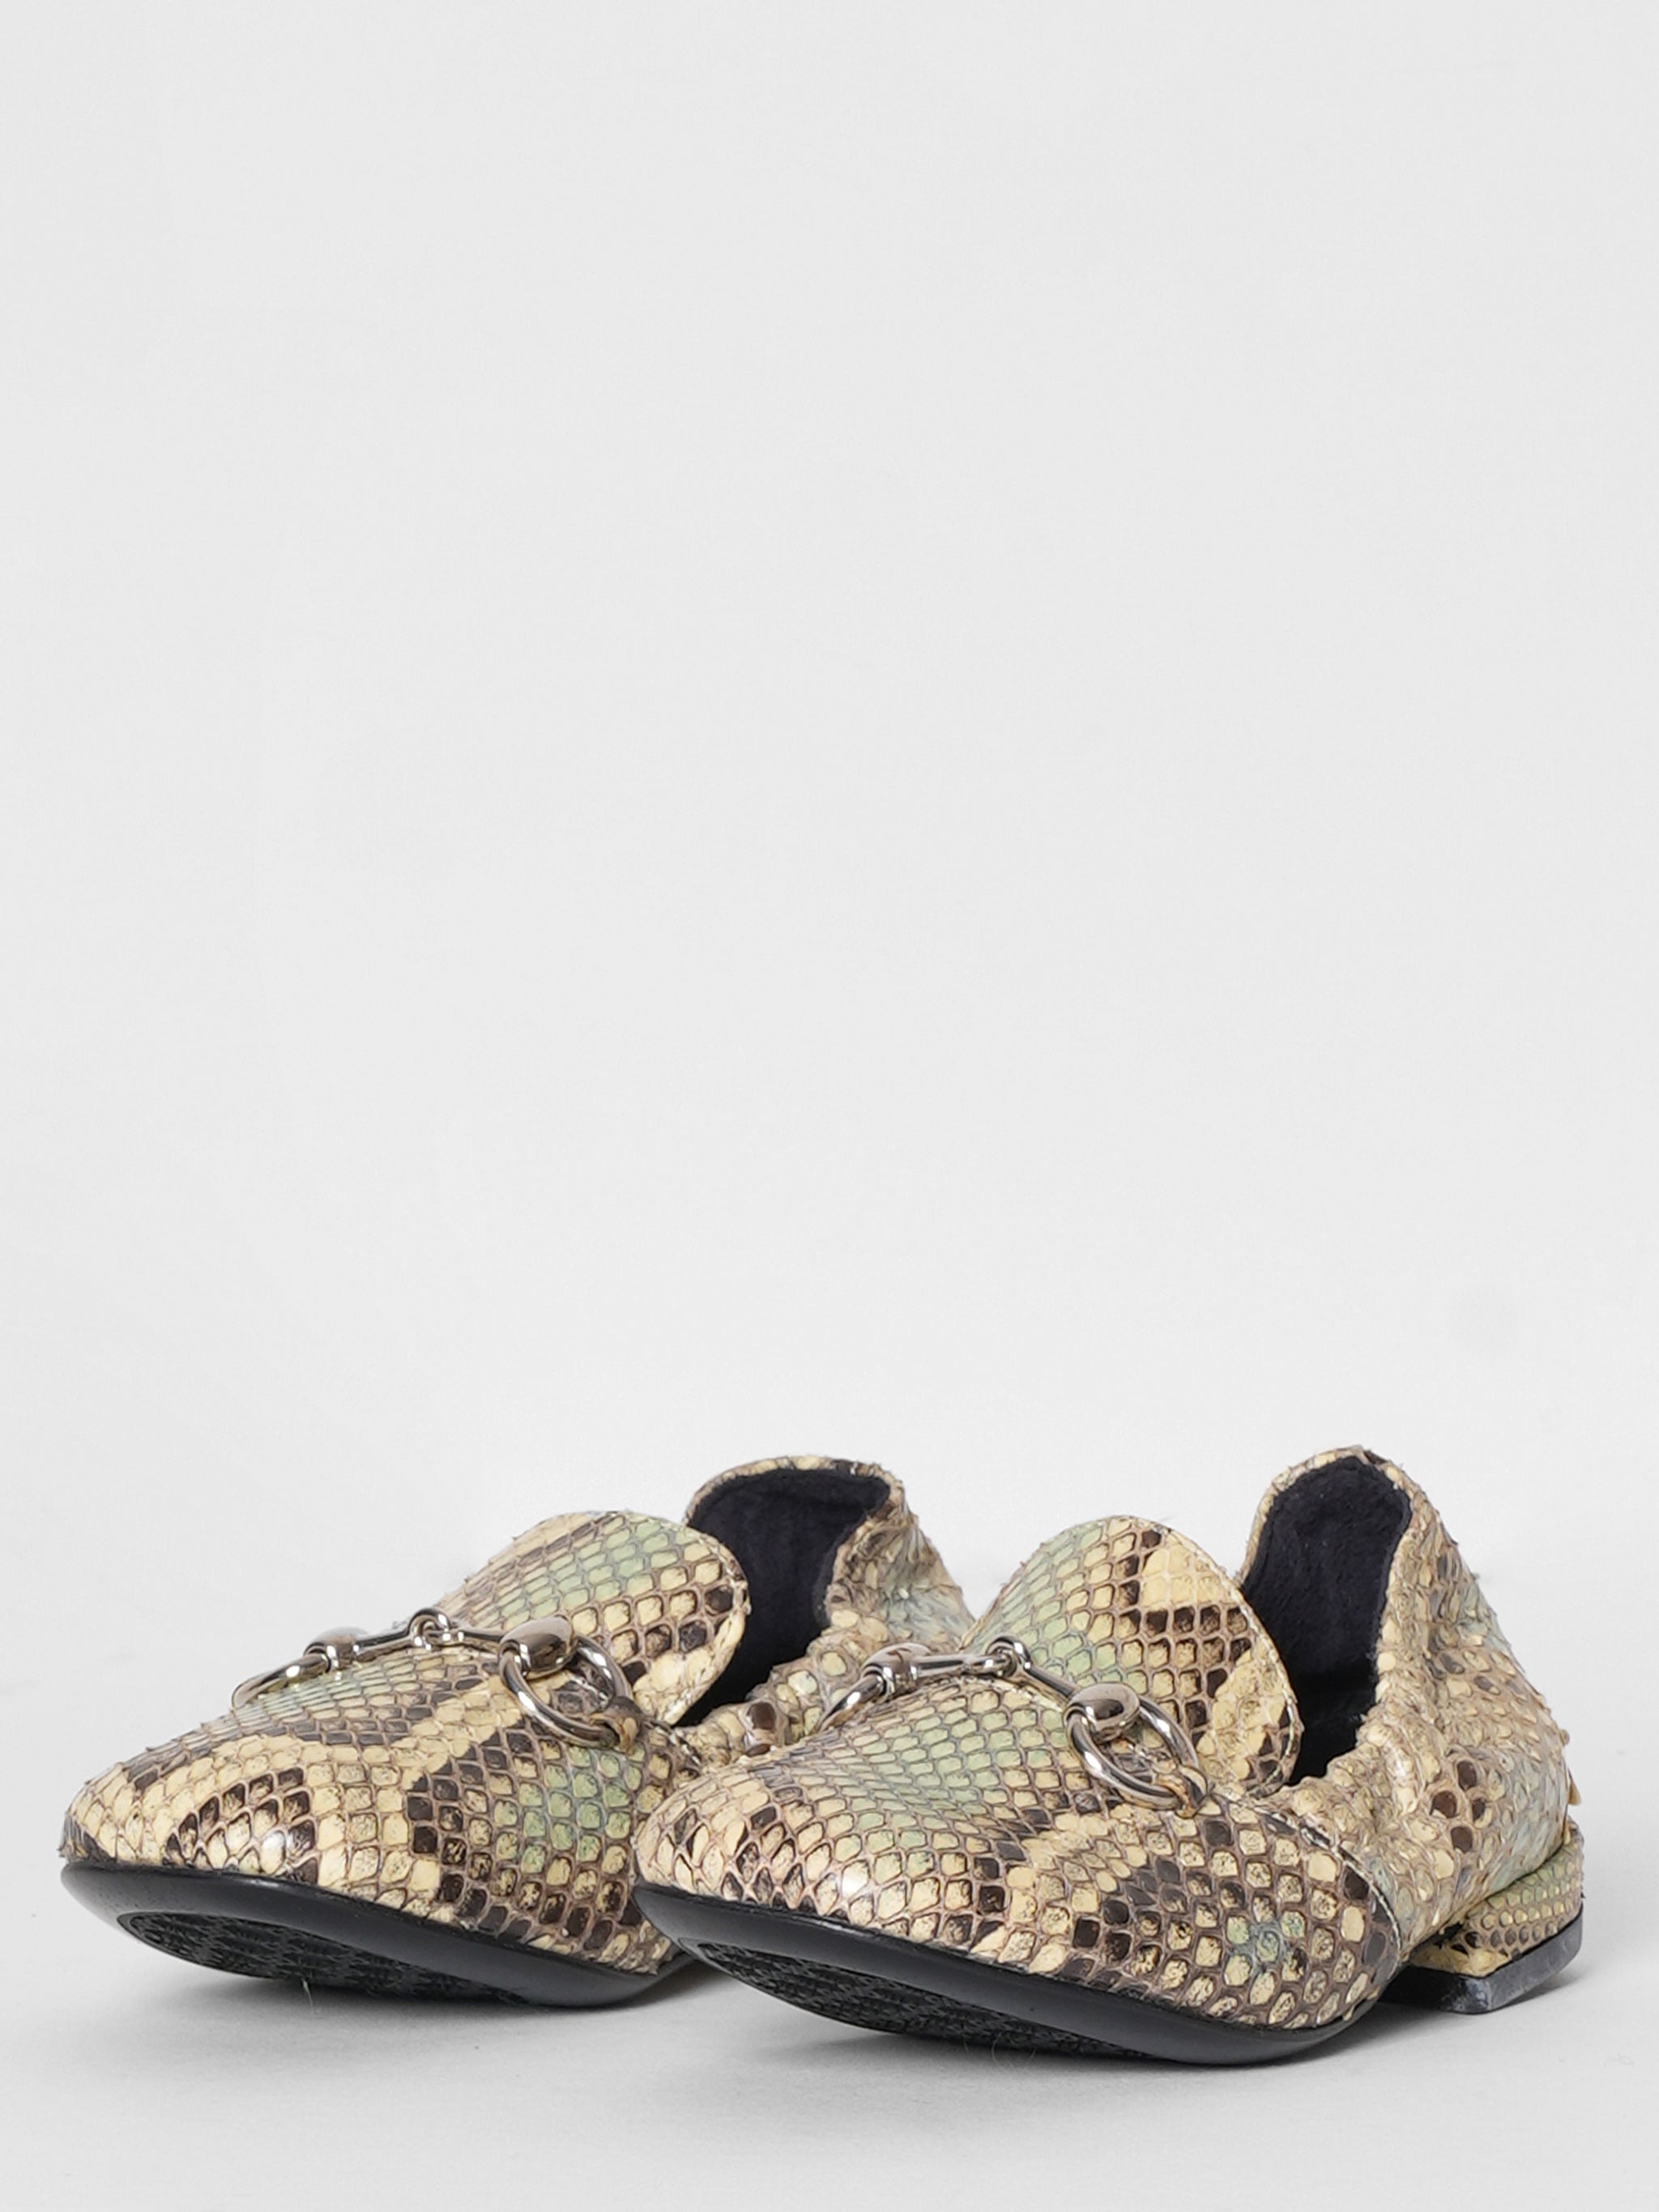 Gucci Snake Skin Shoes